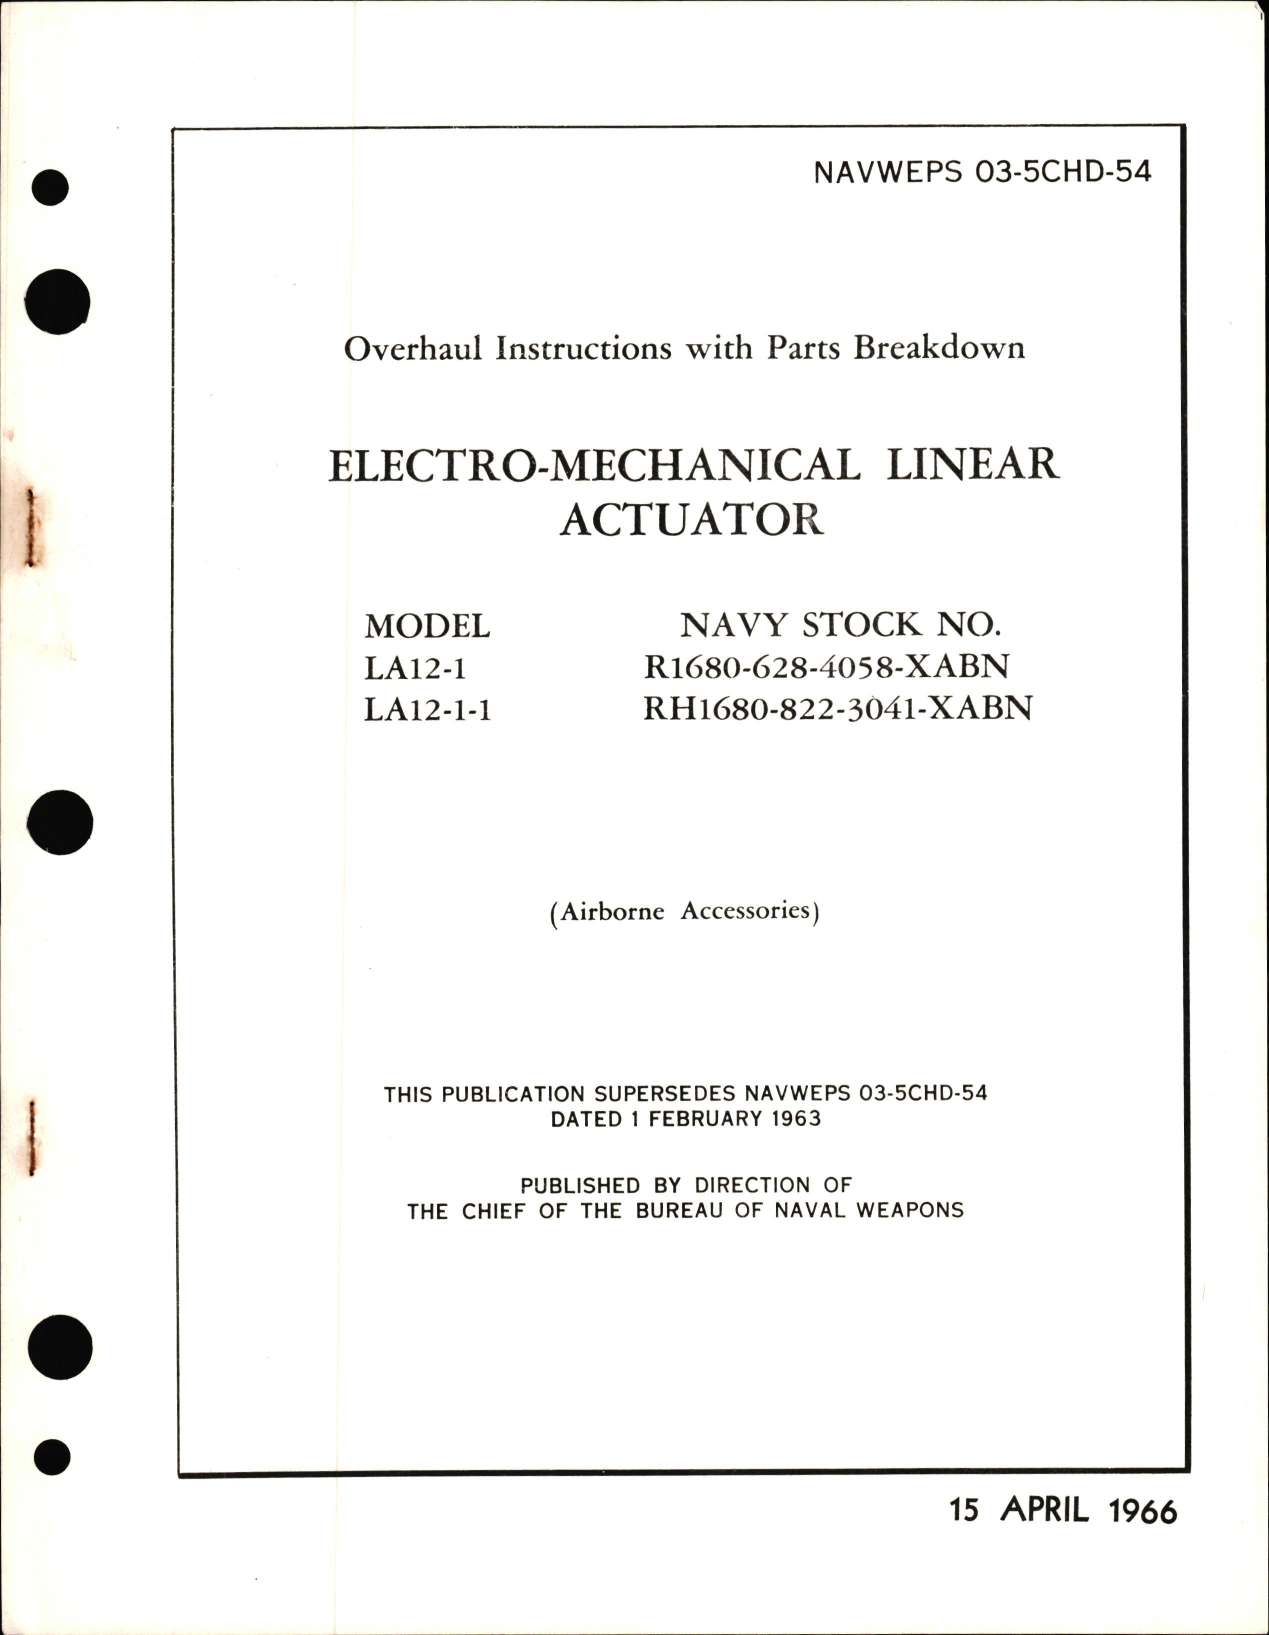 Sample page 1 from AirCorps Library document: Overhaul Instructions with Parts Breakdown for Electro-Mechanical Linear Actuator Model LA12-1, LA12-1-1, R1680-628-4058-XABN, and RH1680-822-3041-XABM